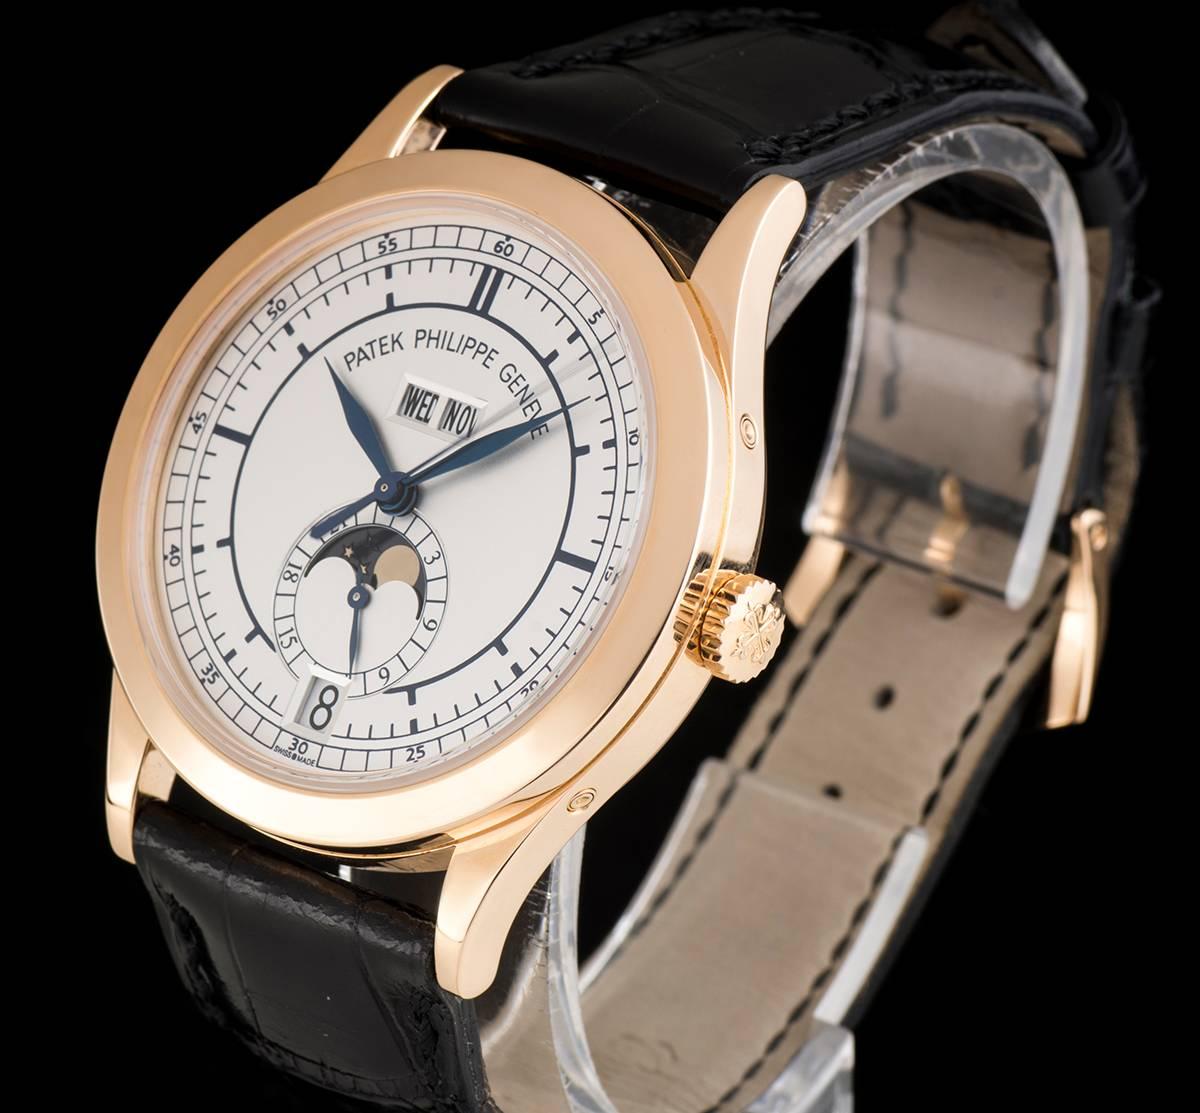 An 18k Rose Gold Annual Calendar Gents Wristwatch, silvery opaline dial with hour markers, date aperture and 24 hour indicator with moonphase at 6 0'clock, weekday and month apertures at 12 0'clock, a fixed 18k rose gold bezel, an original black